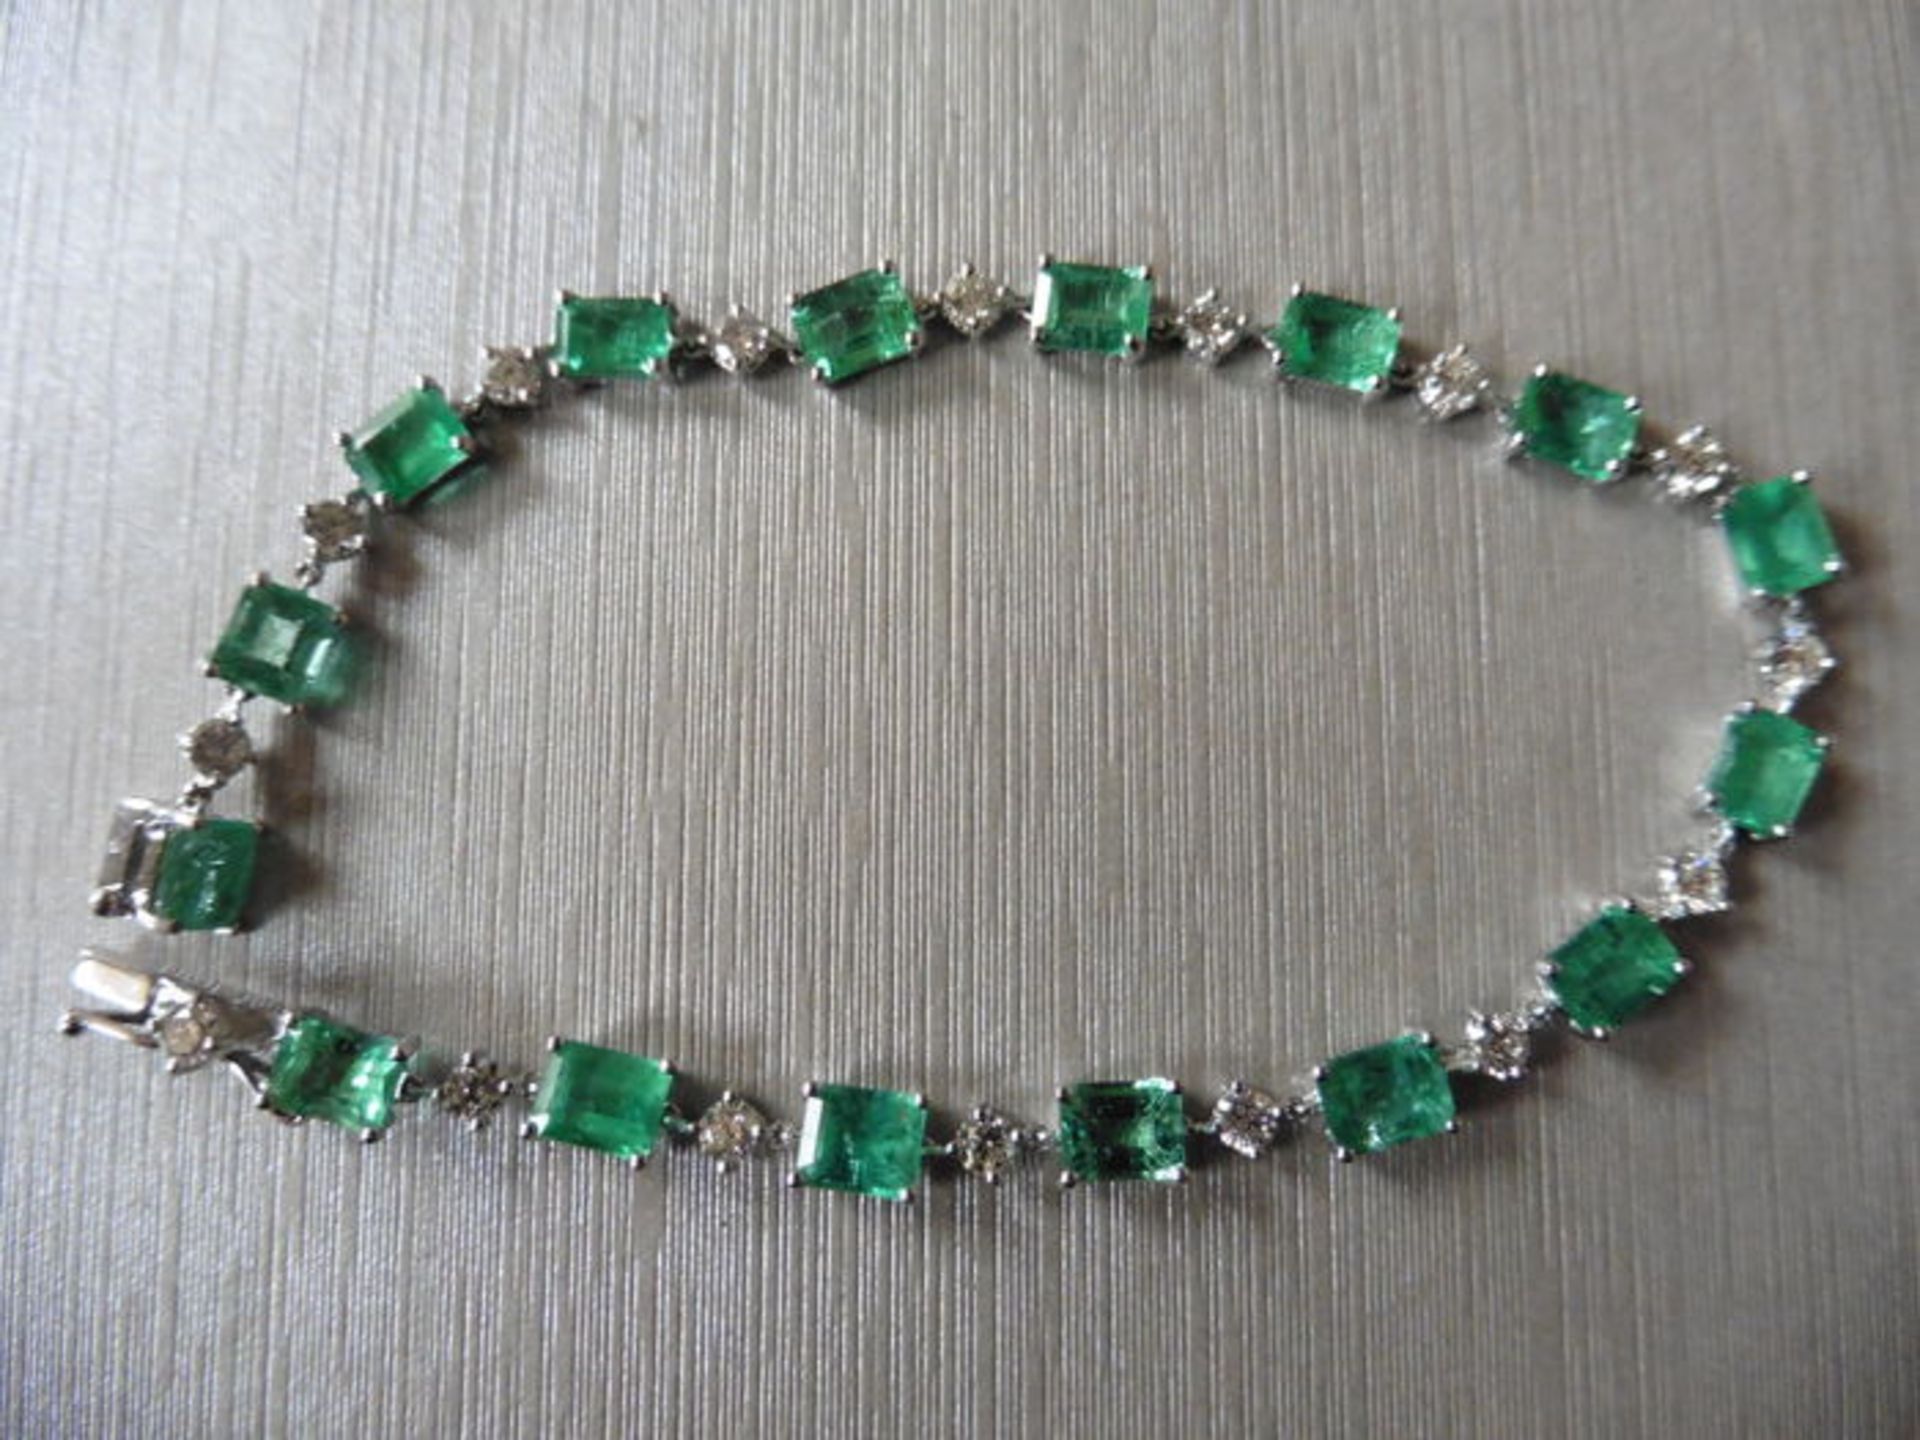 6ct emerald and diamond bracelet.Set with emerald cut ( treated ) emeralds and small brilliant cut